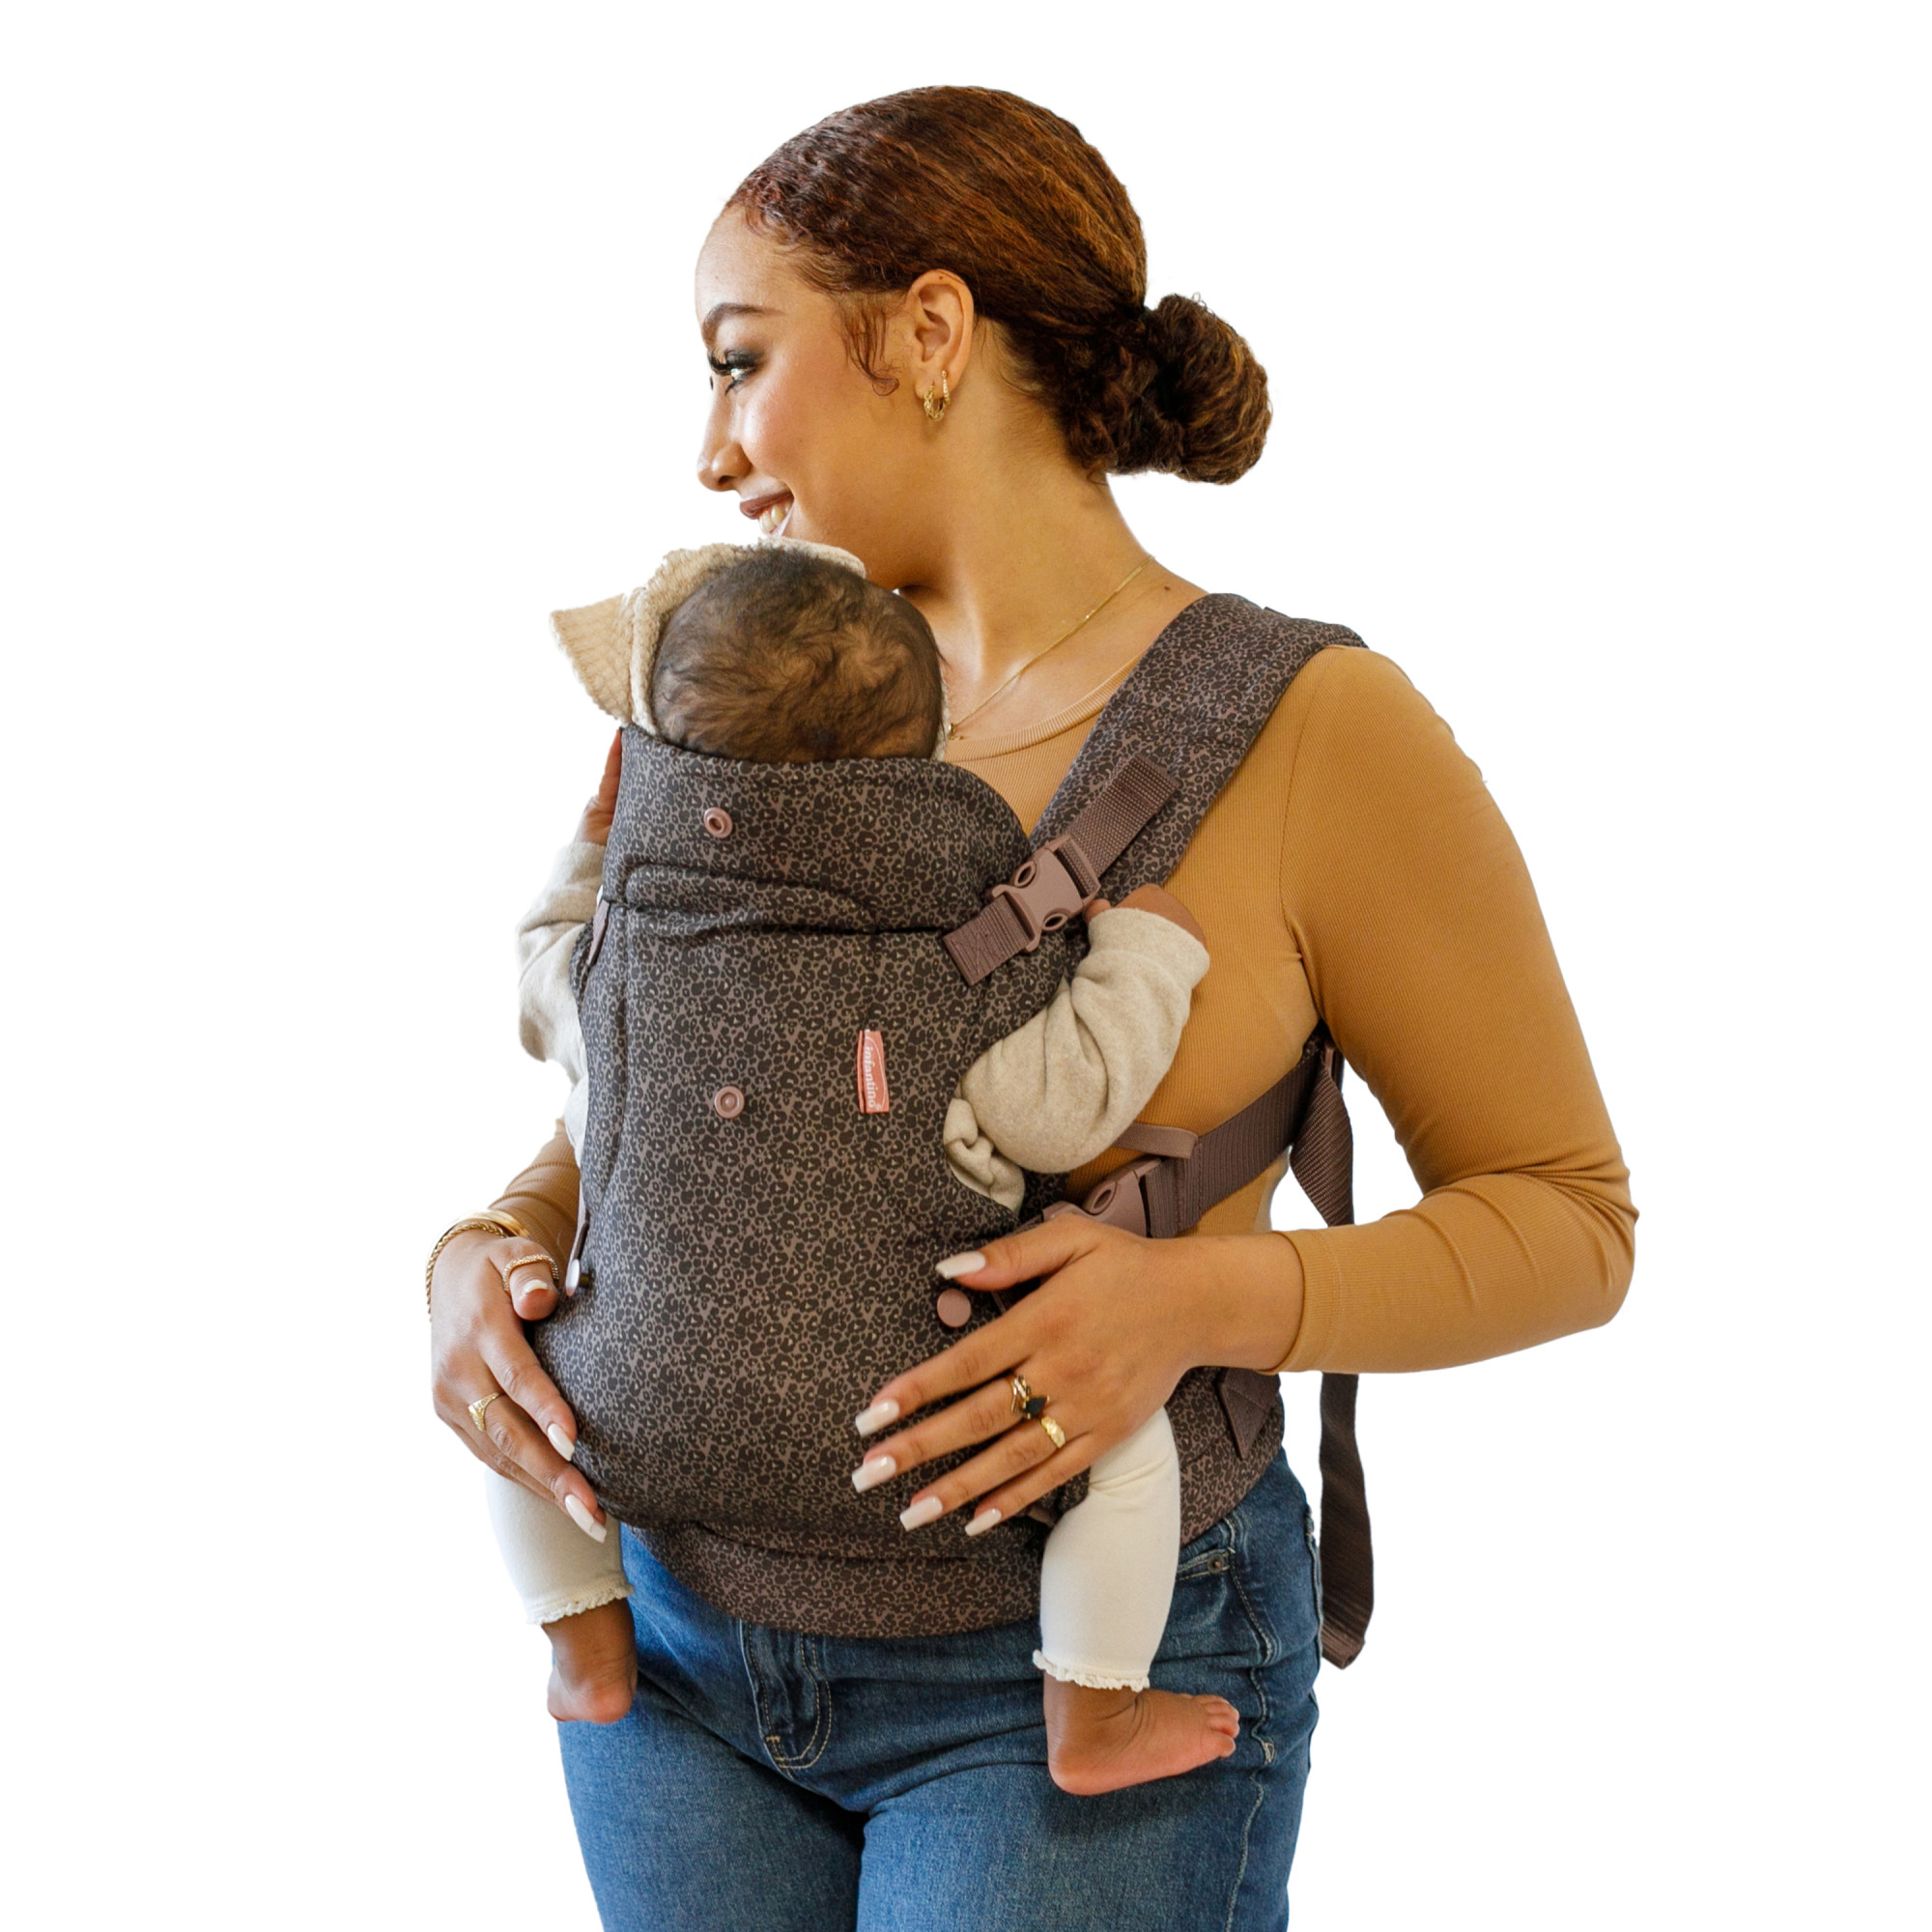 Infantino Flip 4-in-1 Convertible Baby Carrier, 4-Position, Unisex, 8-32lbs, Leopard - image 1 of 13